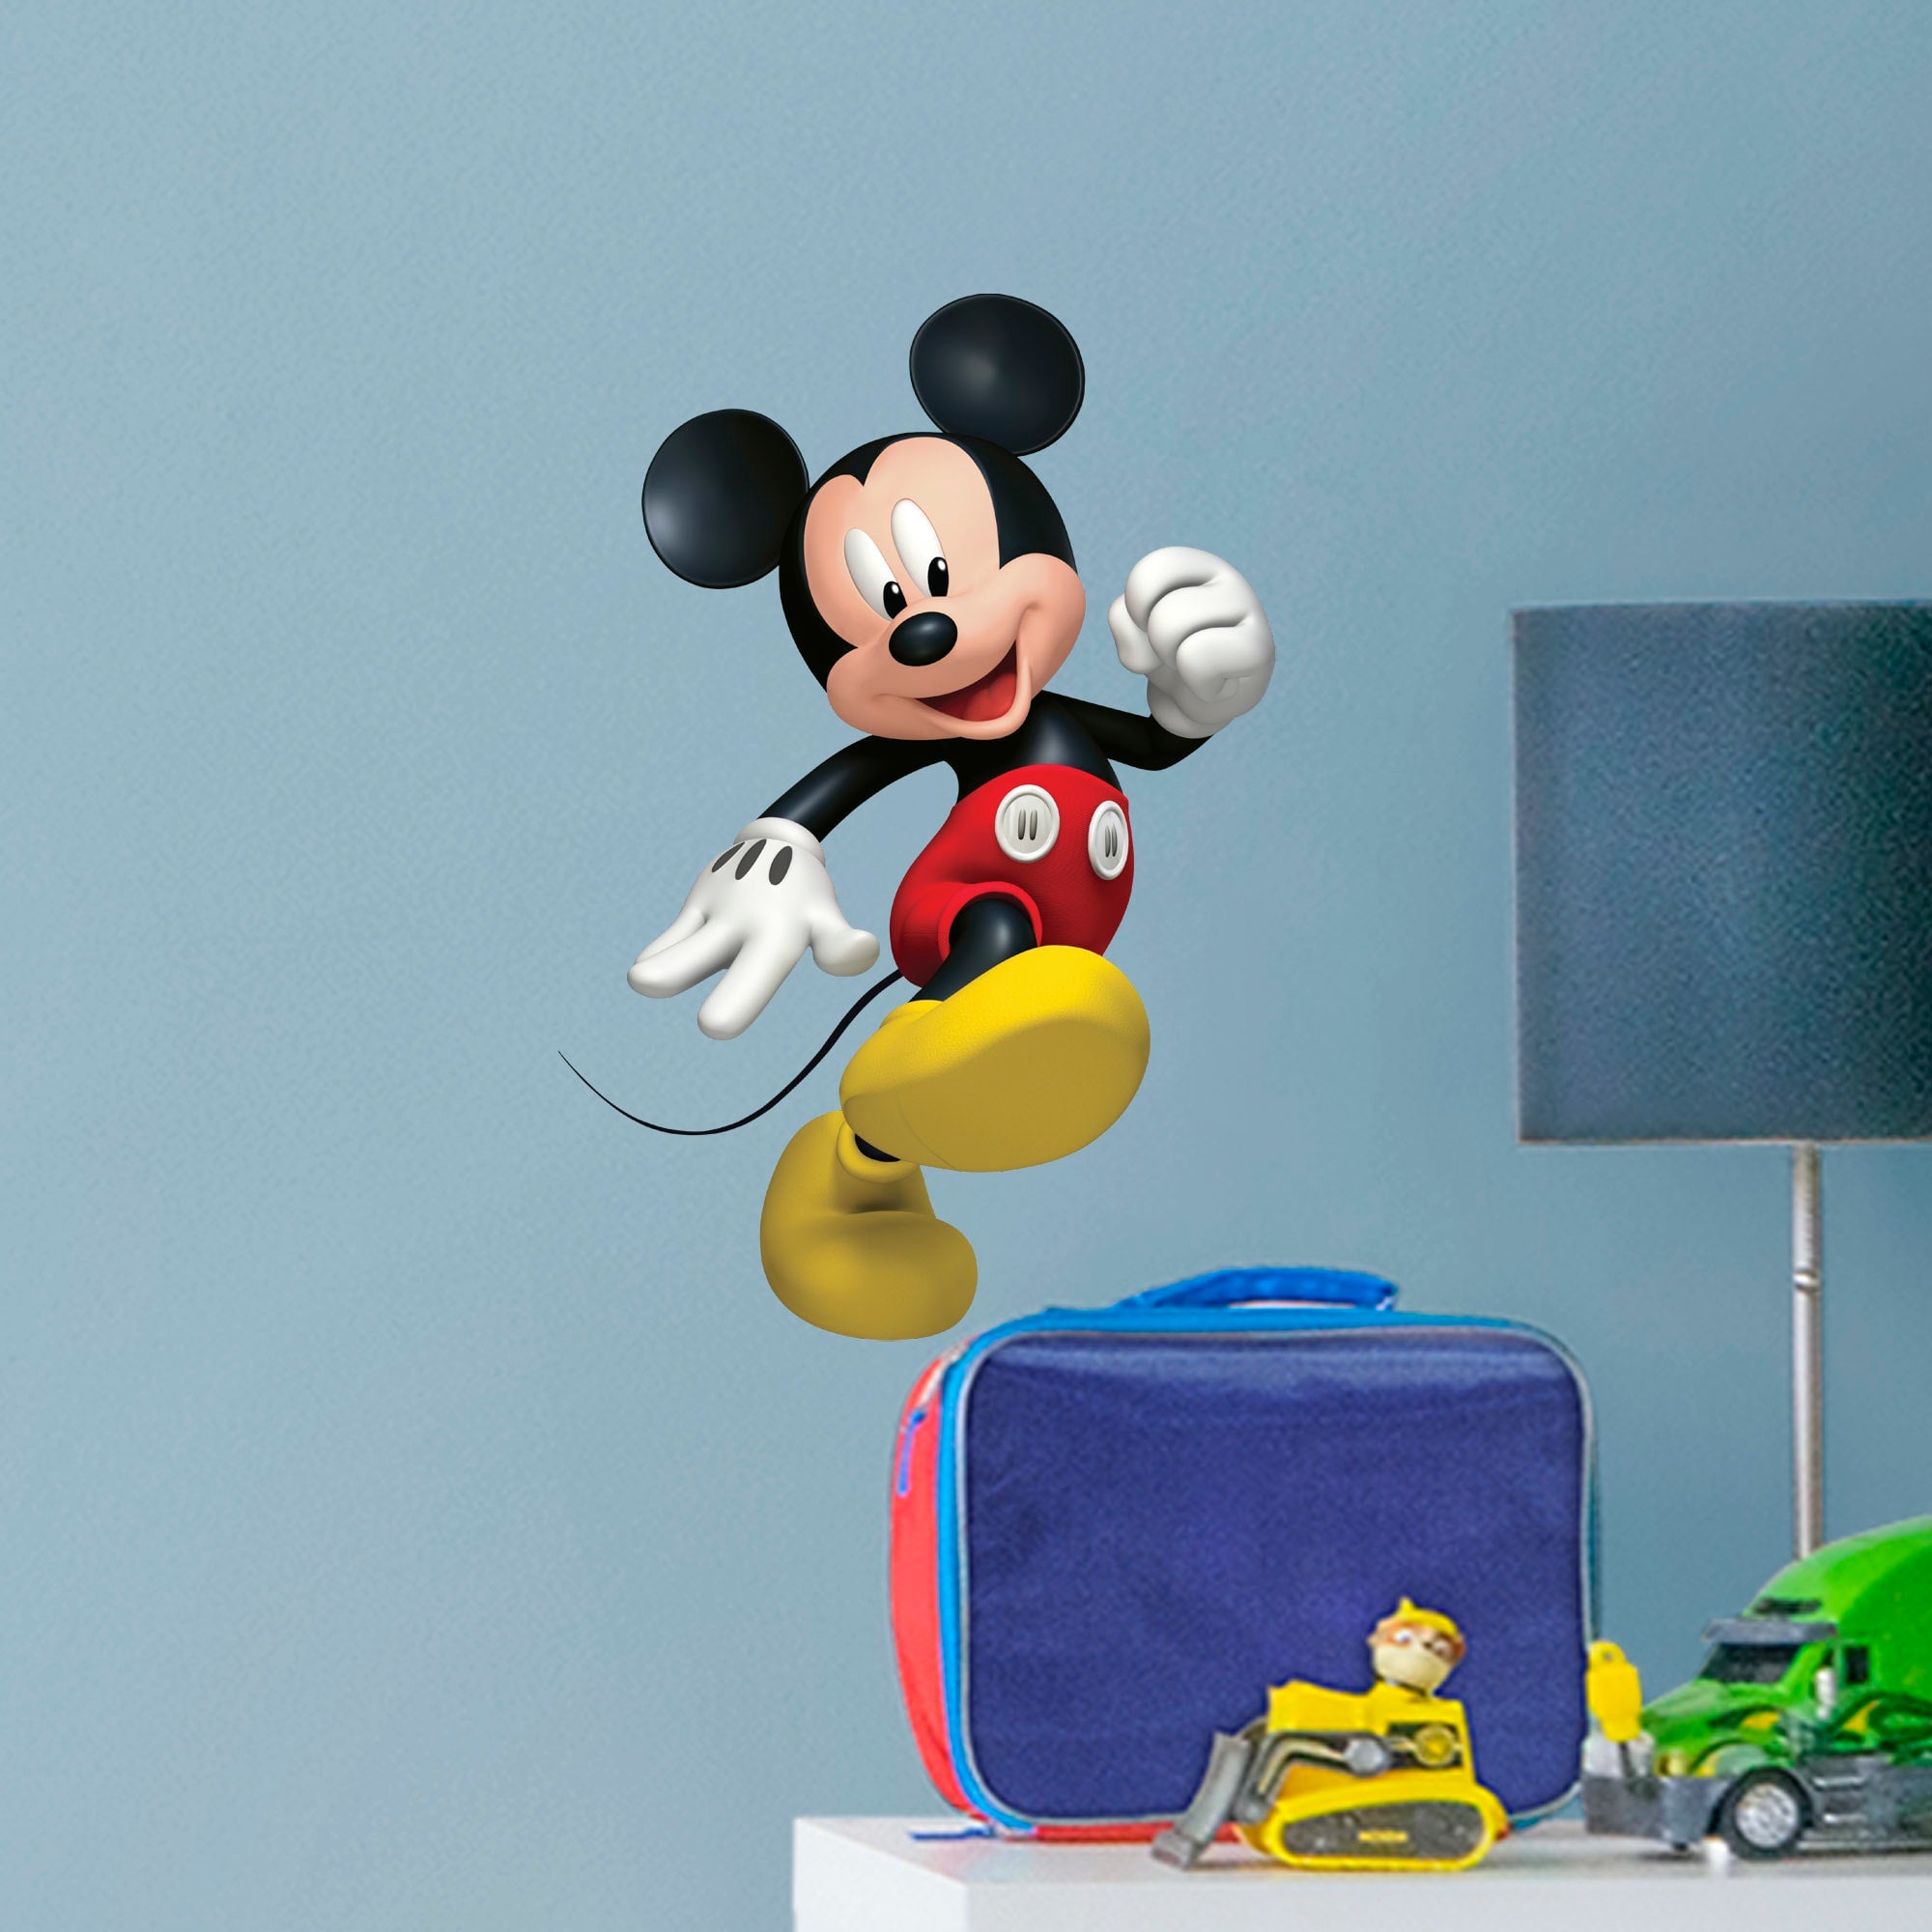 Mickey Mouse - Officially Licensed Disney Removable Wall Decal Large by Fathead | Vinyl